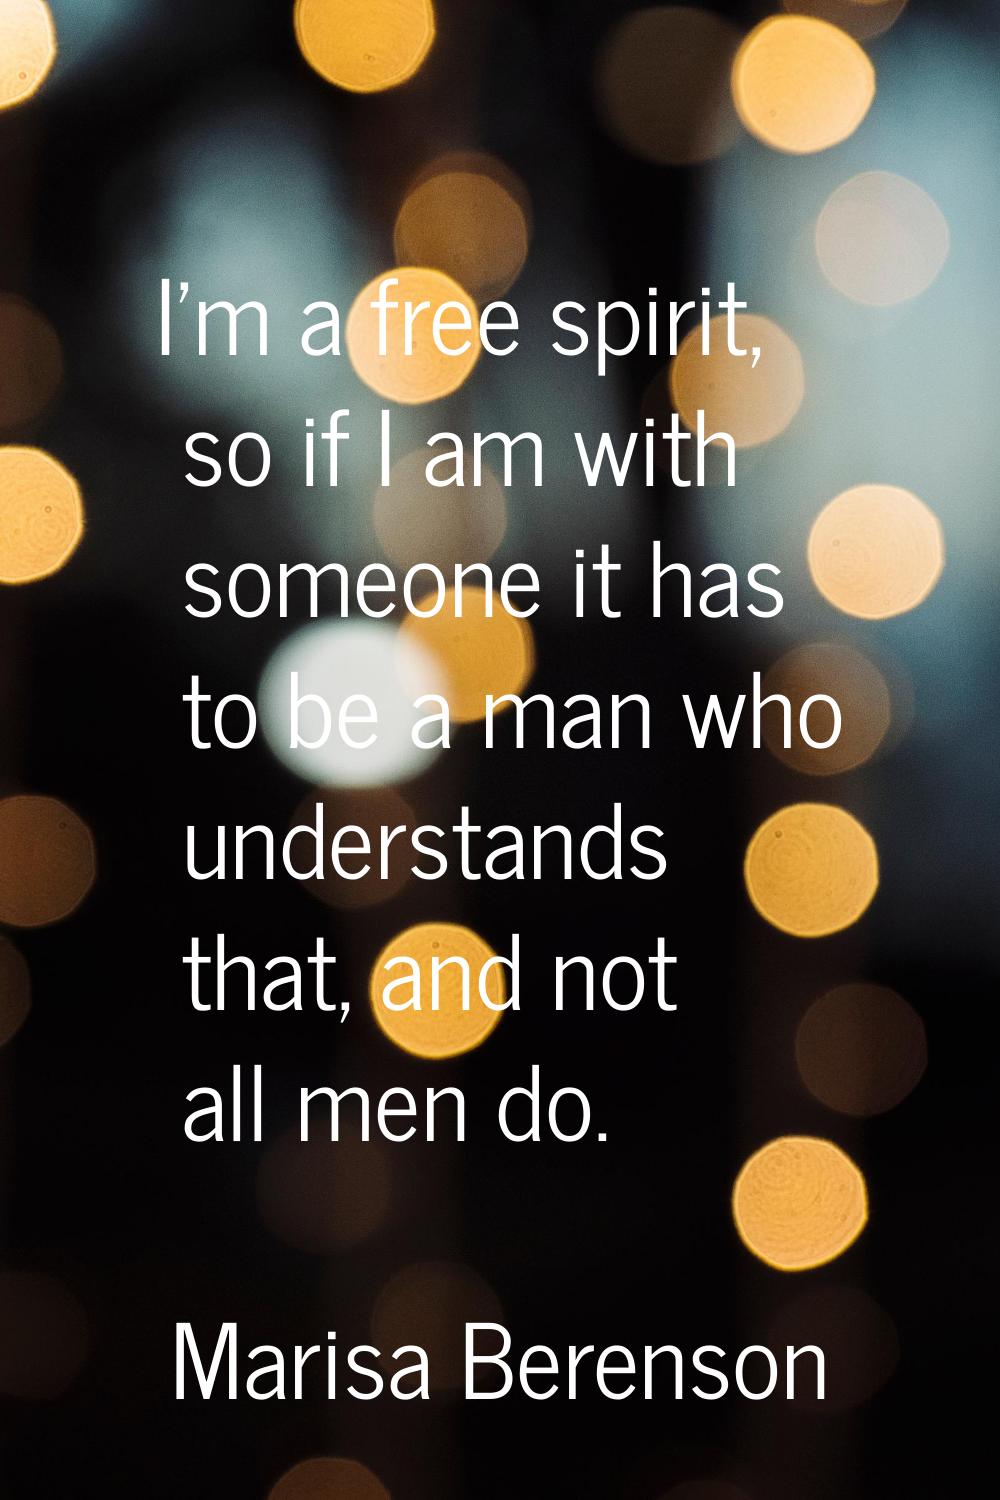 I'm a free spirit, so if I am with someone it has to be a man who understands that, and not all men